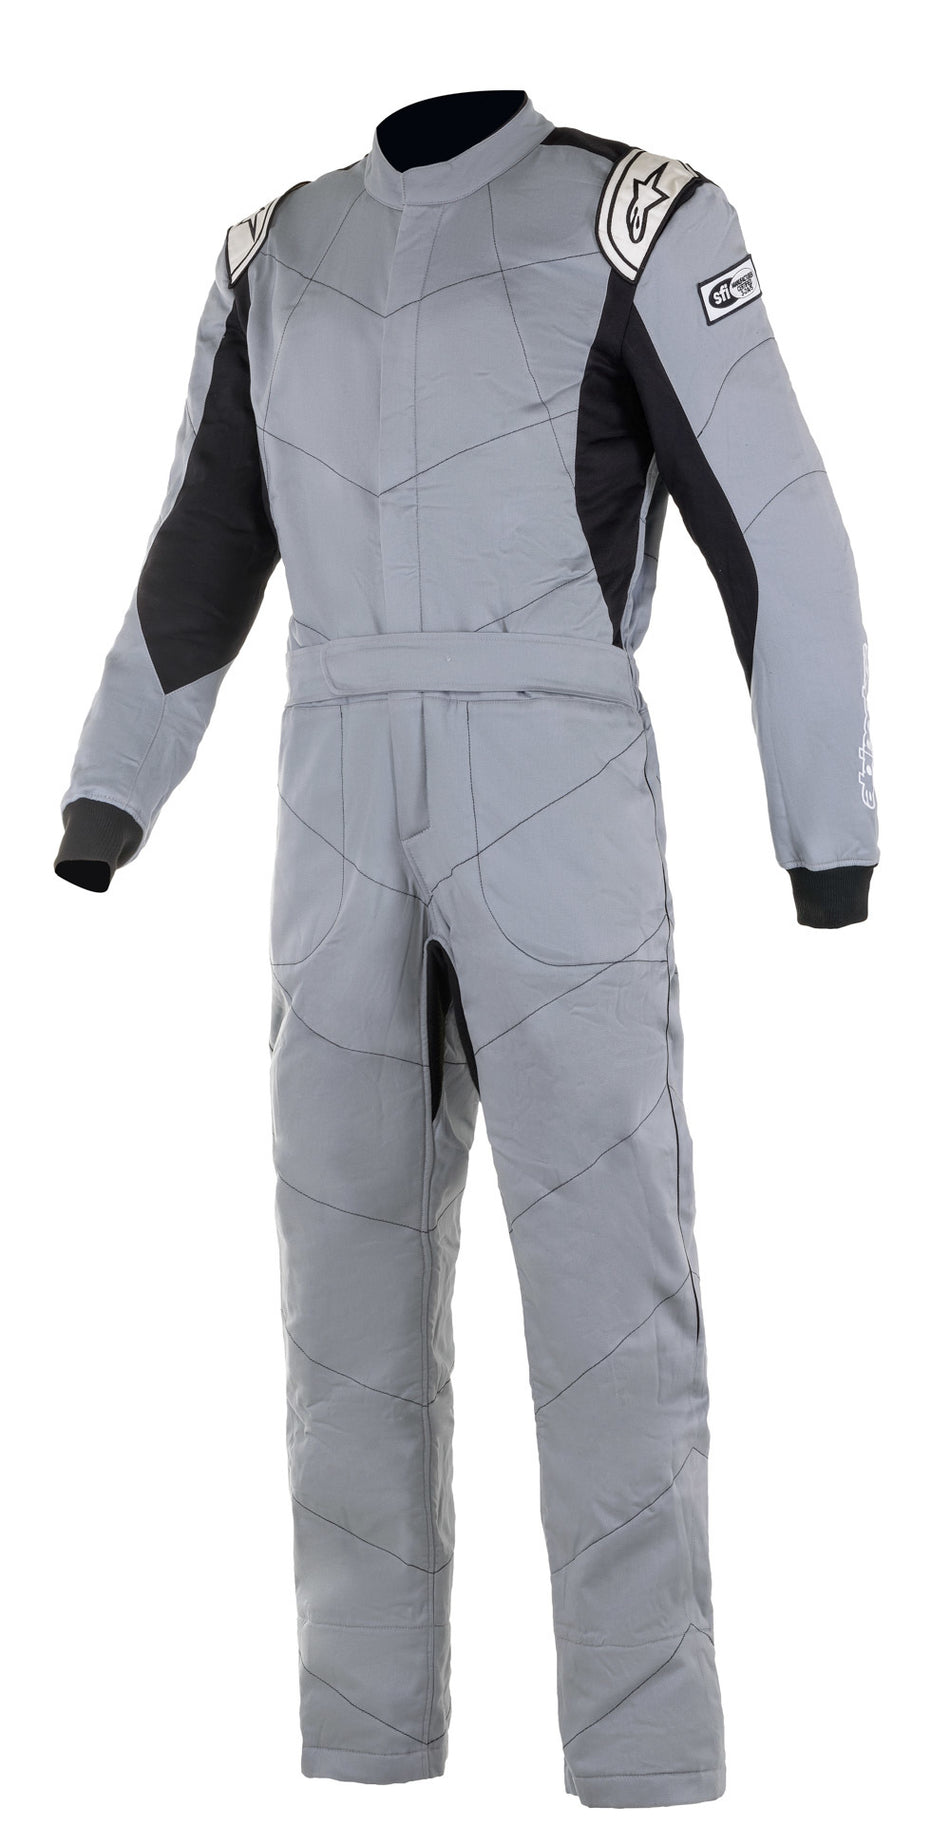 Driving Suit - Knoxville V2 - 1-Piece - SFI 3.2A/5 - Boot-Cut - Triple Layer - Fire Retardant Fabric - Gray / Black - Size 54 - Medium / Large - Each